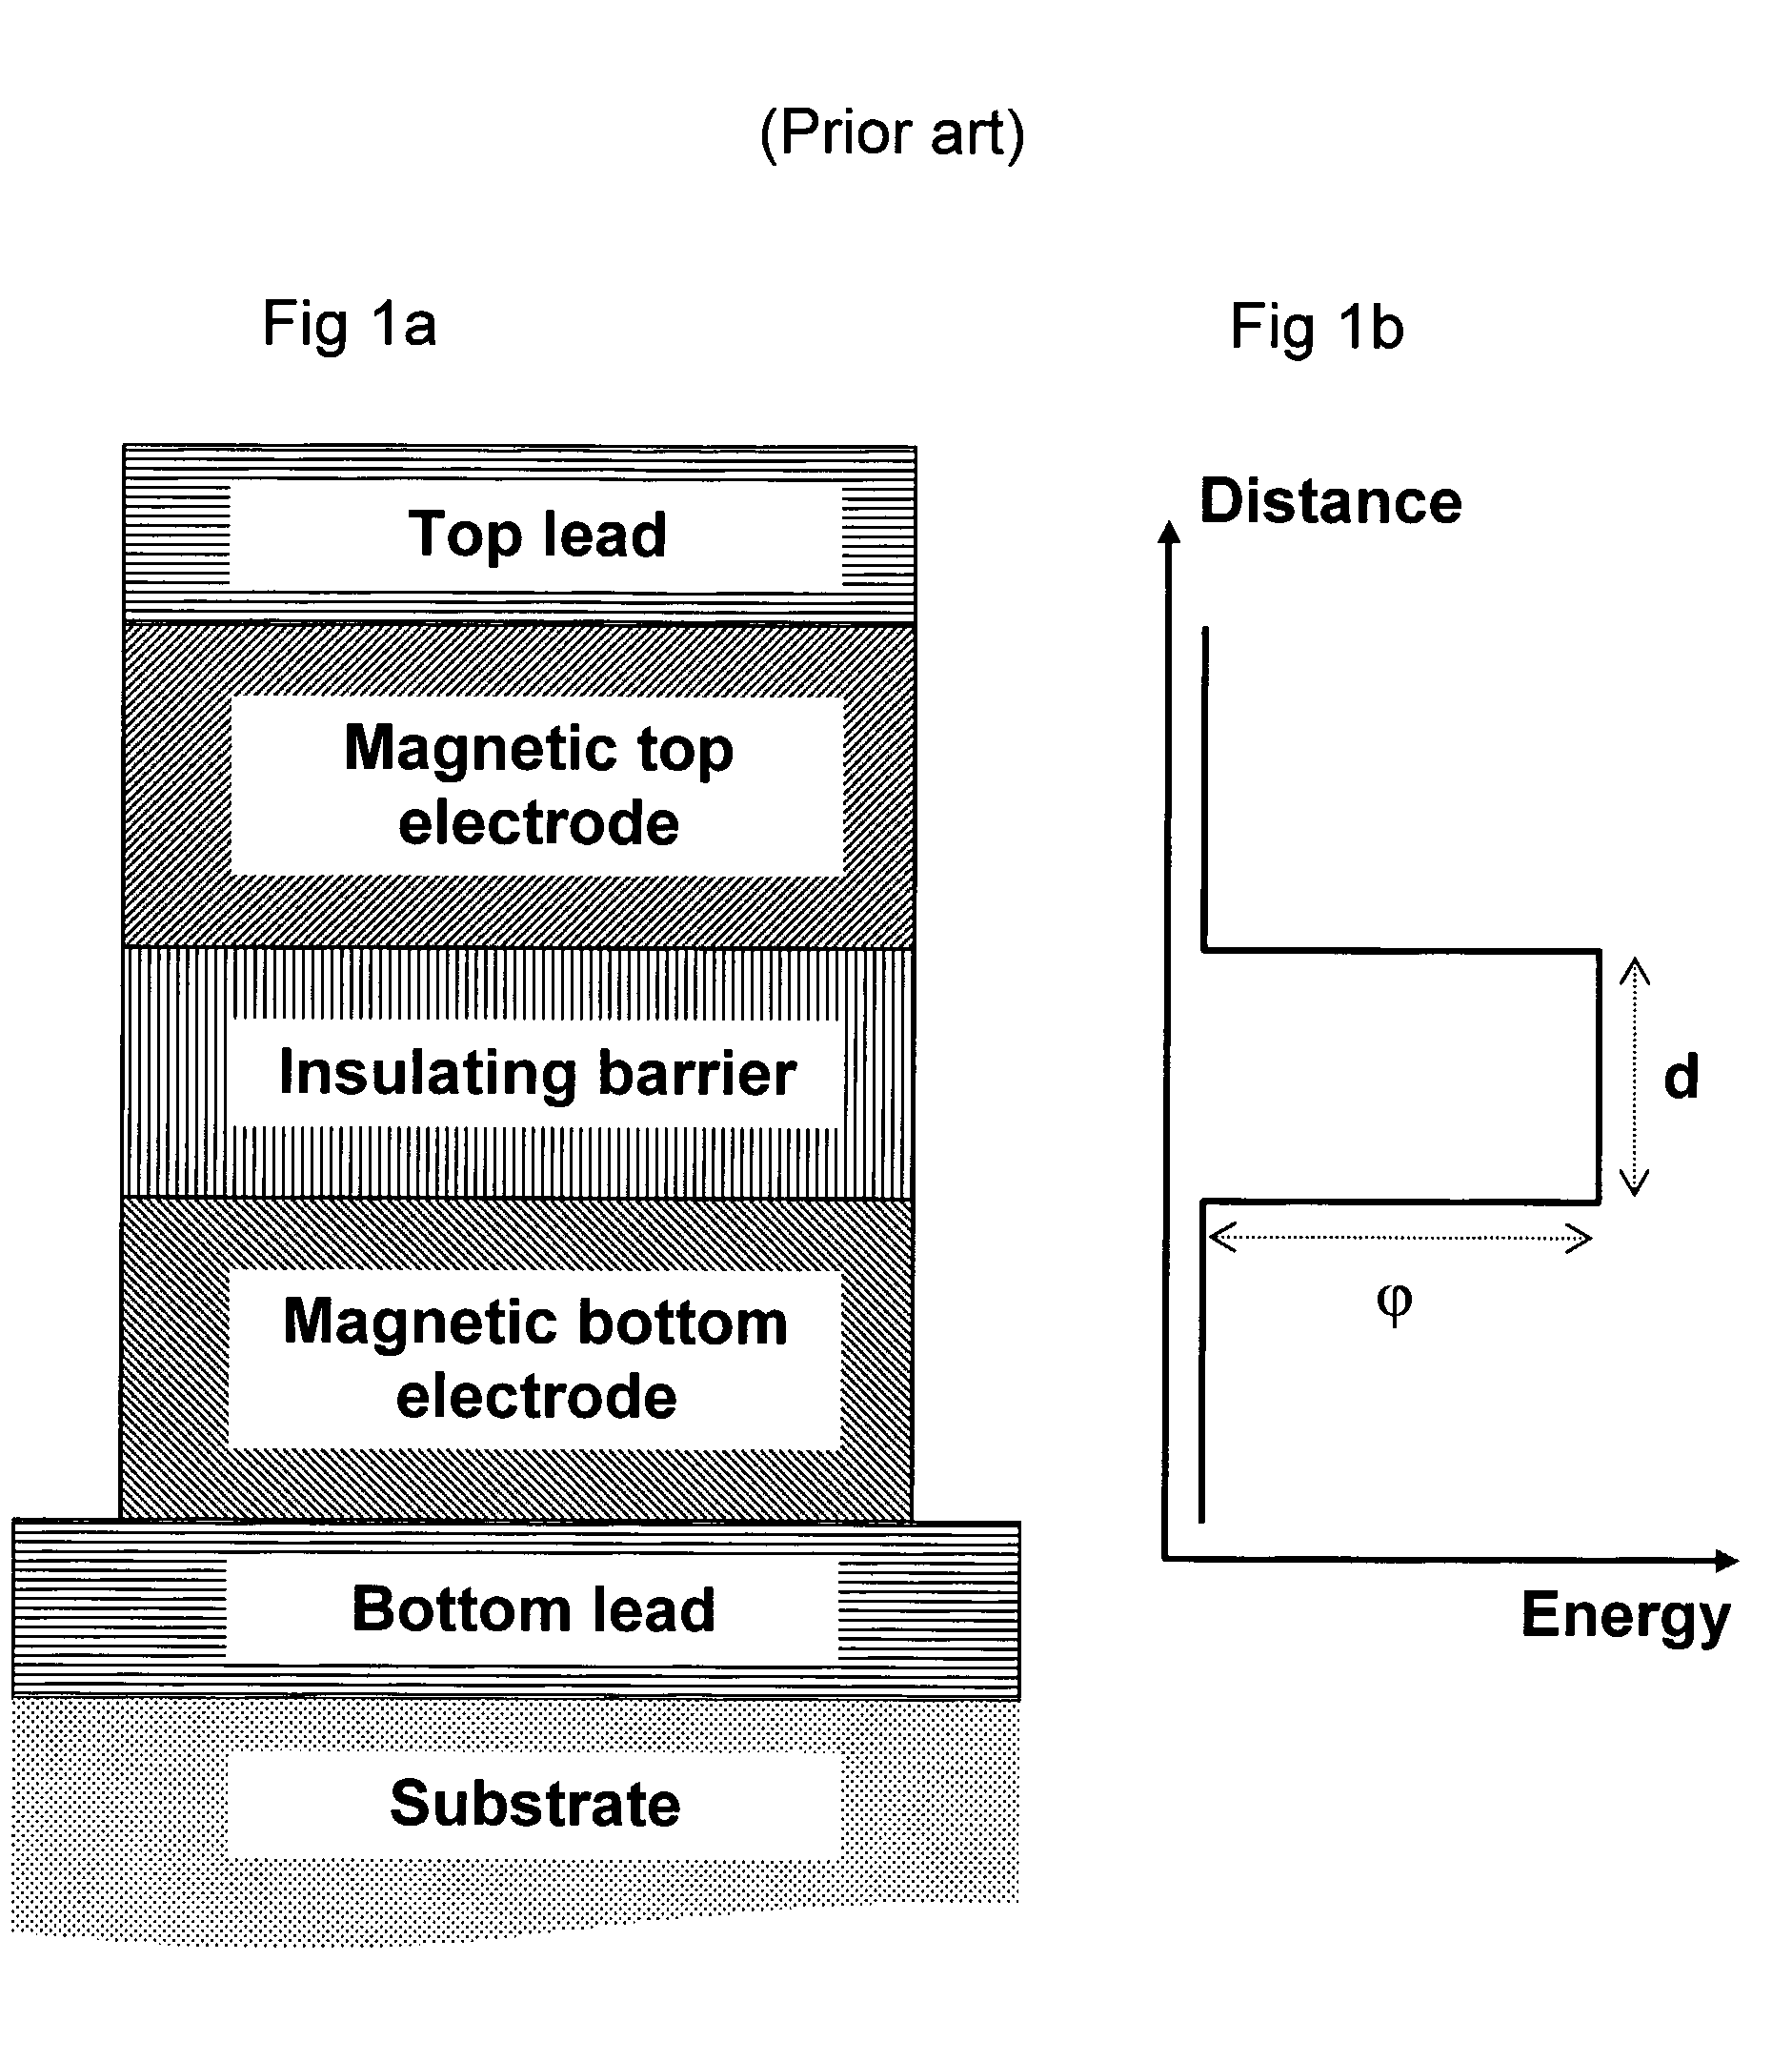 Tunnel Junction Barrier Layer Comprising a Diluted Semiconductor with Spin Sensitivity